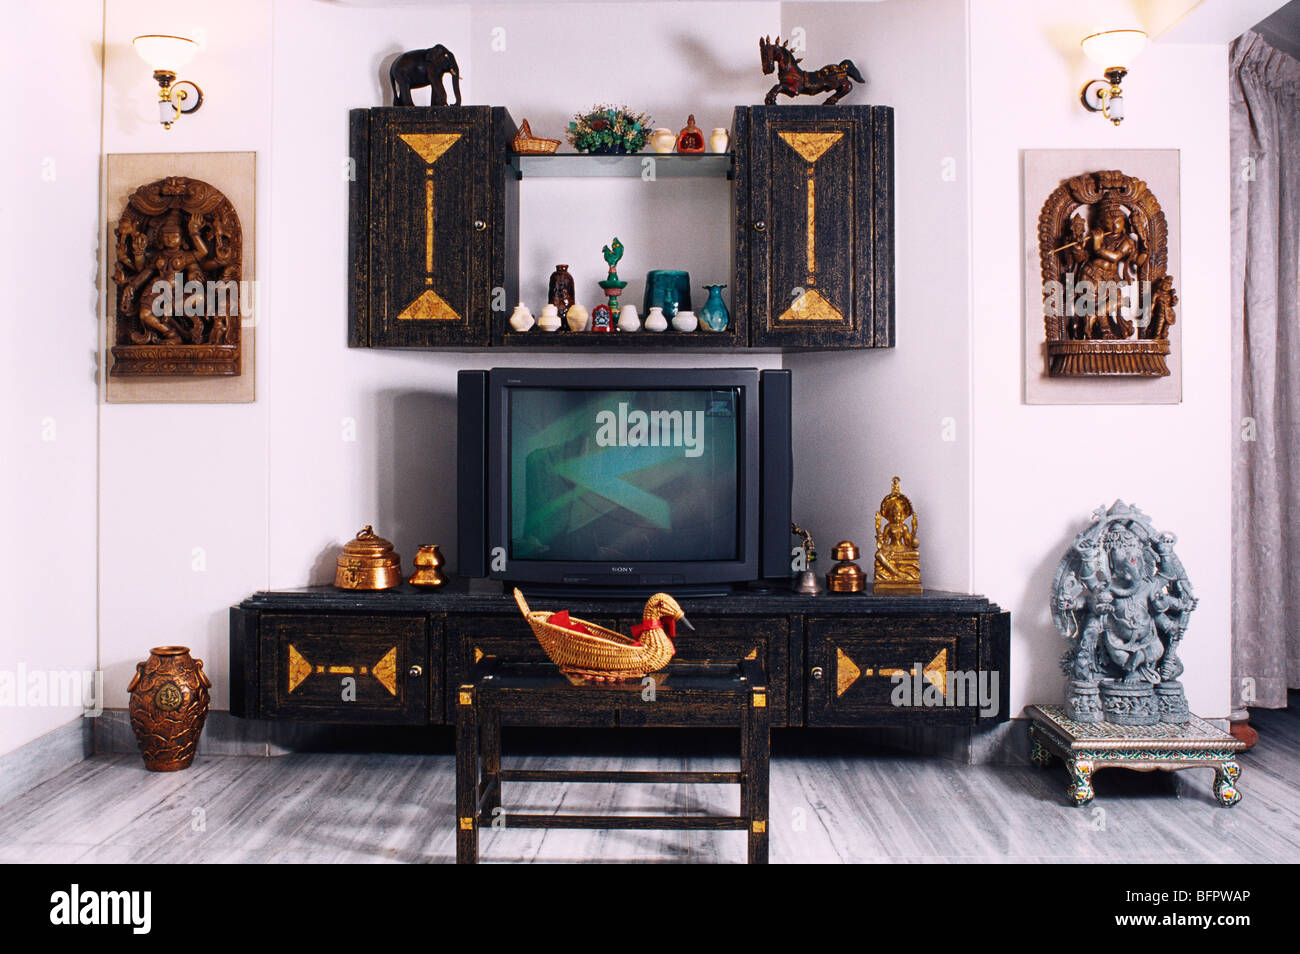 Showcase For Living Room In India